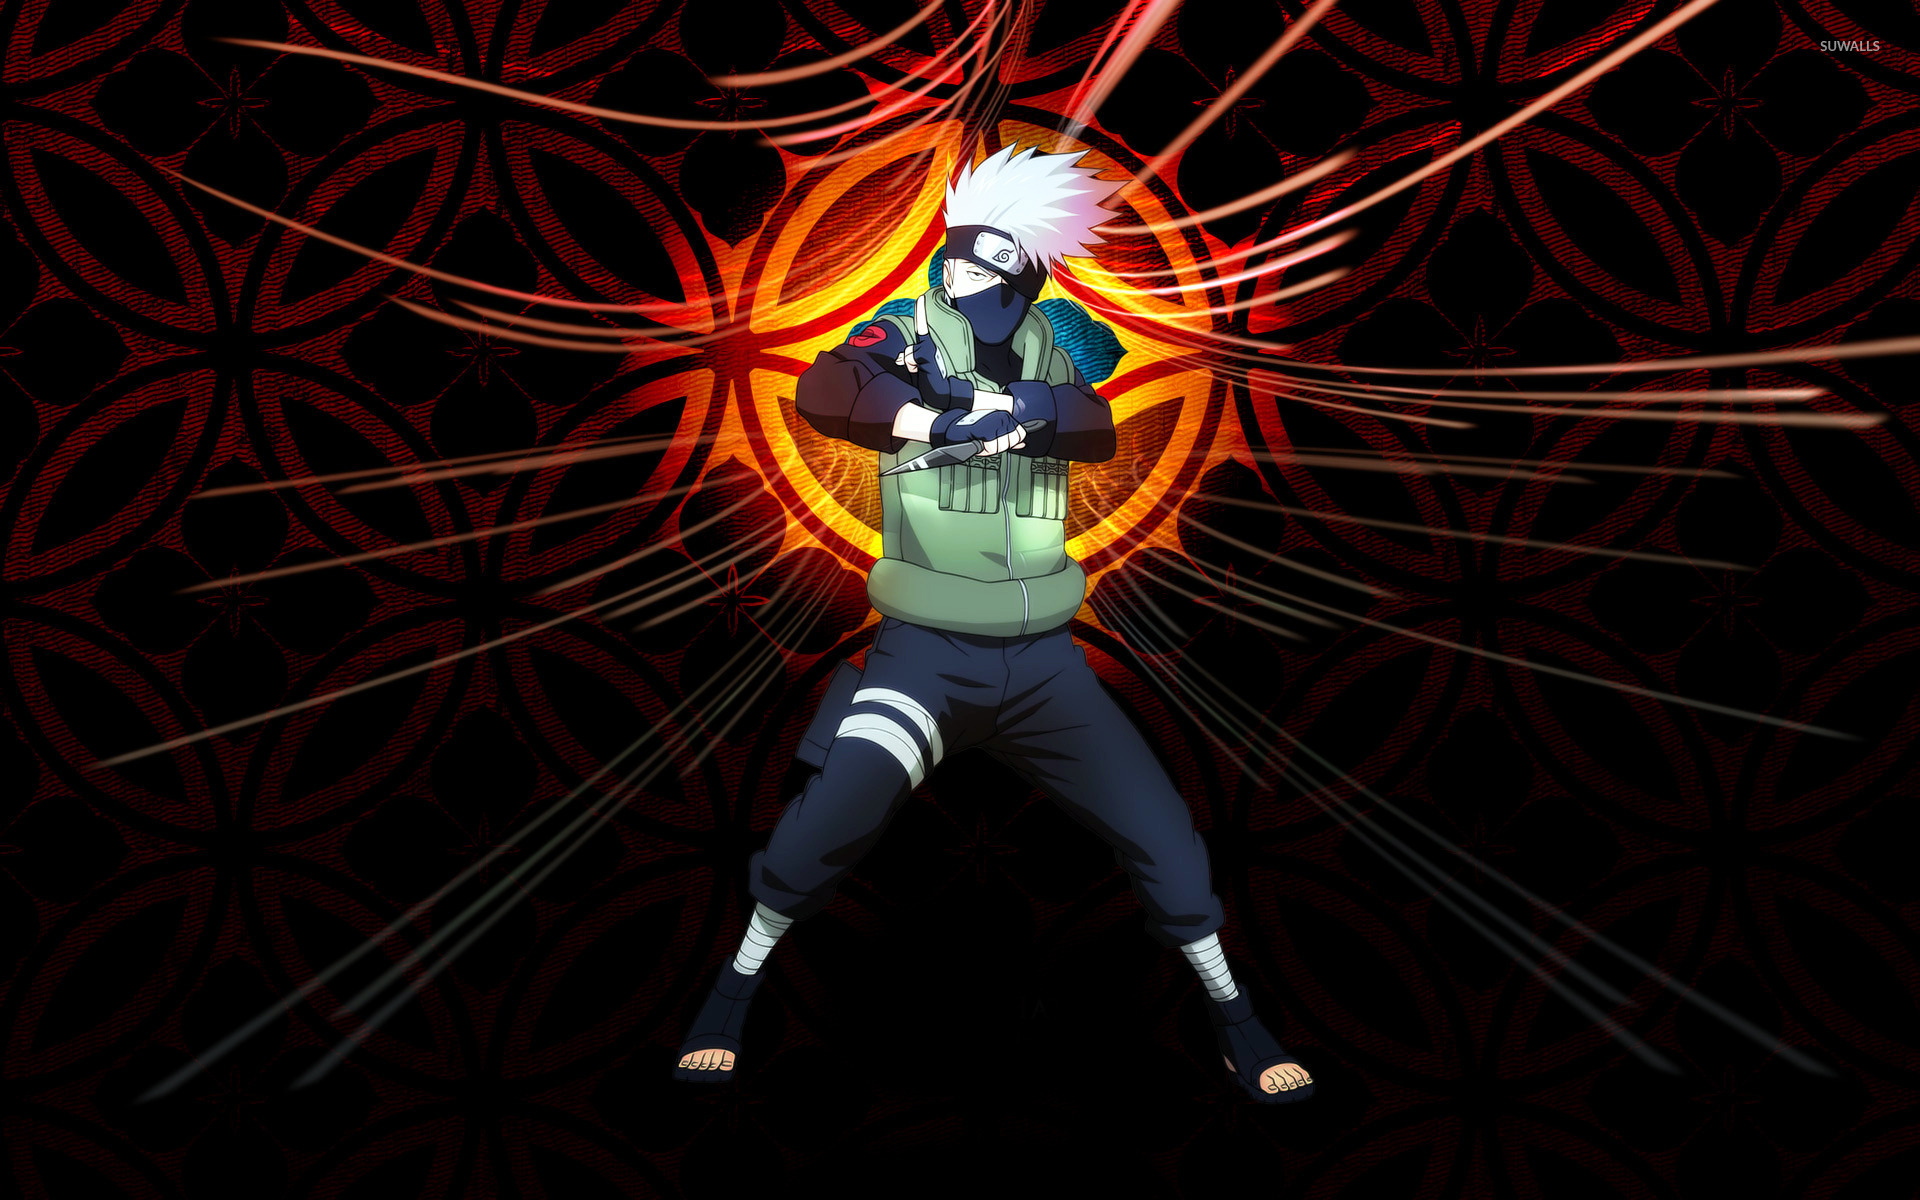 wallpapers on X Edition Naruto Kakashi partie 6 Wallpapers wallpaper  NARUTO anime kakashihatake httpstcoJAaFD1qT2S  X